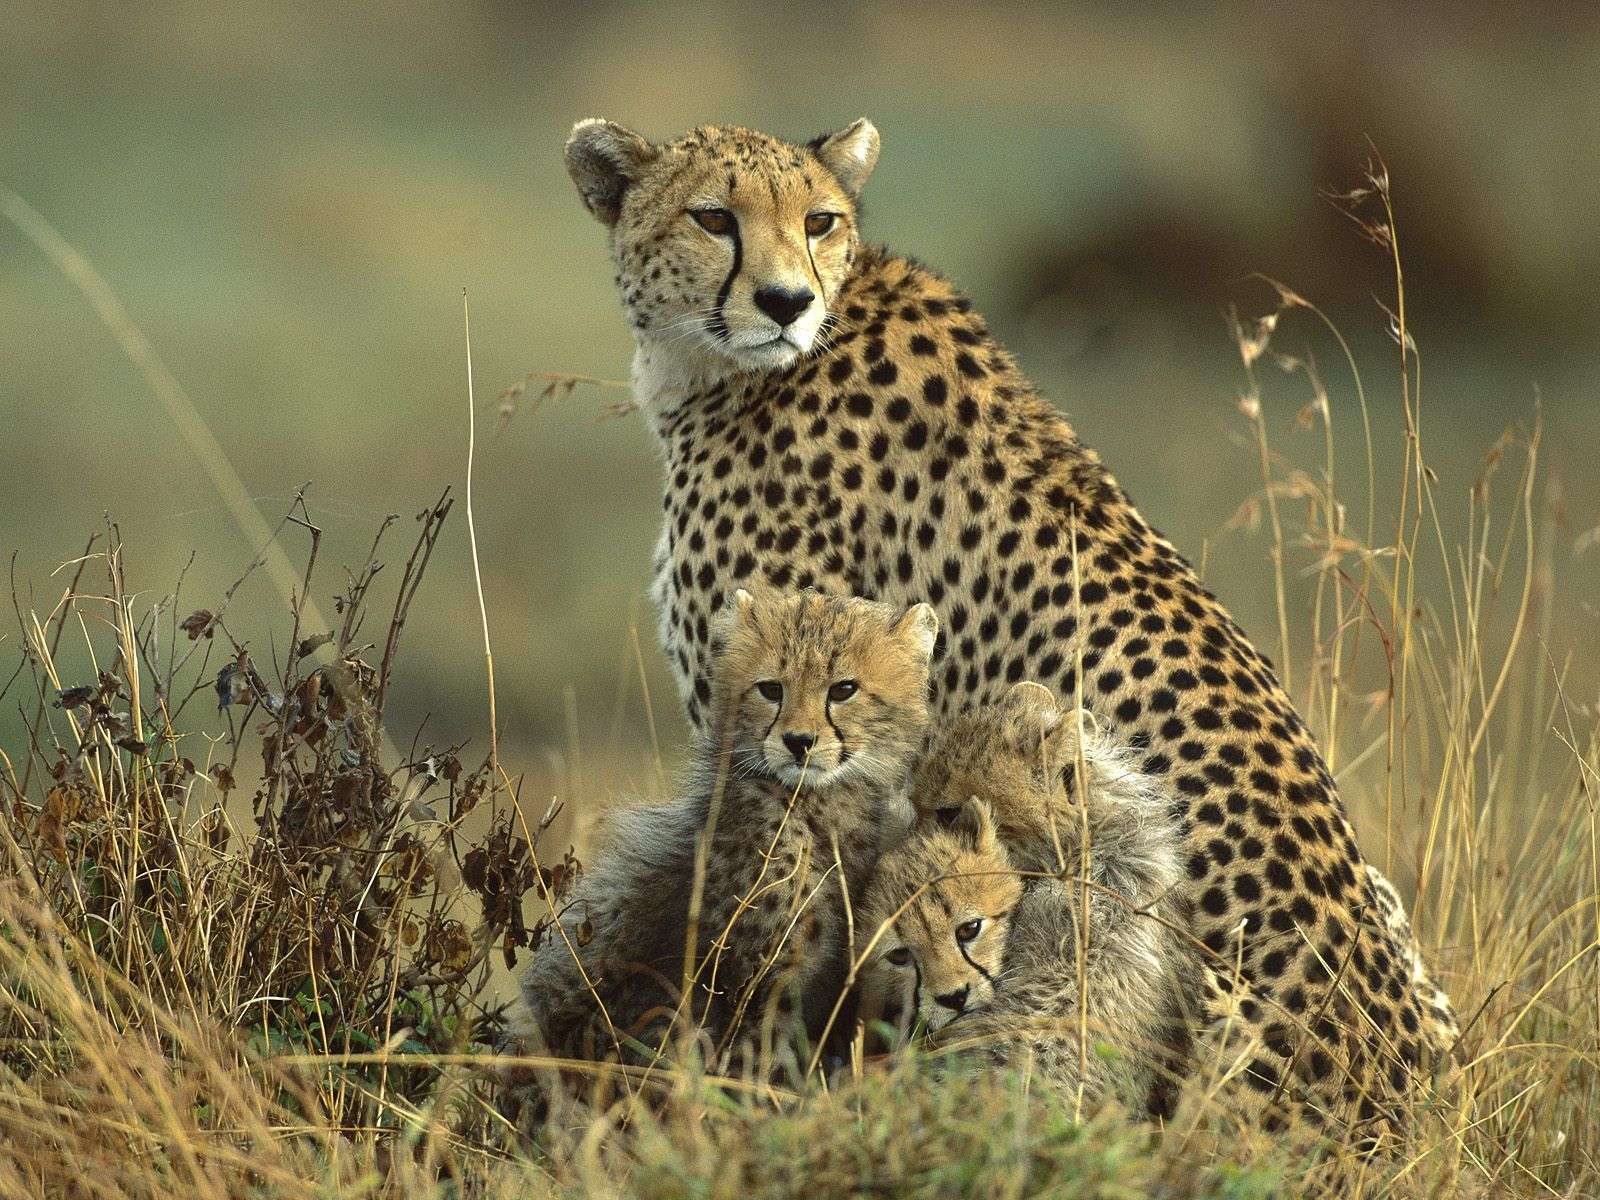 Affectionate Cheetahs Wallpaper, Image Collection